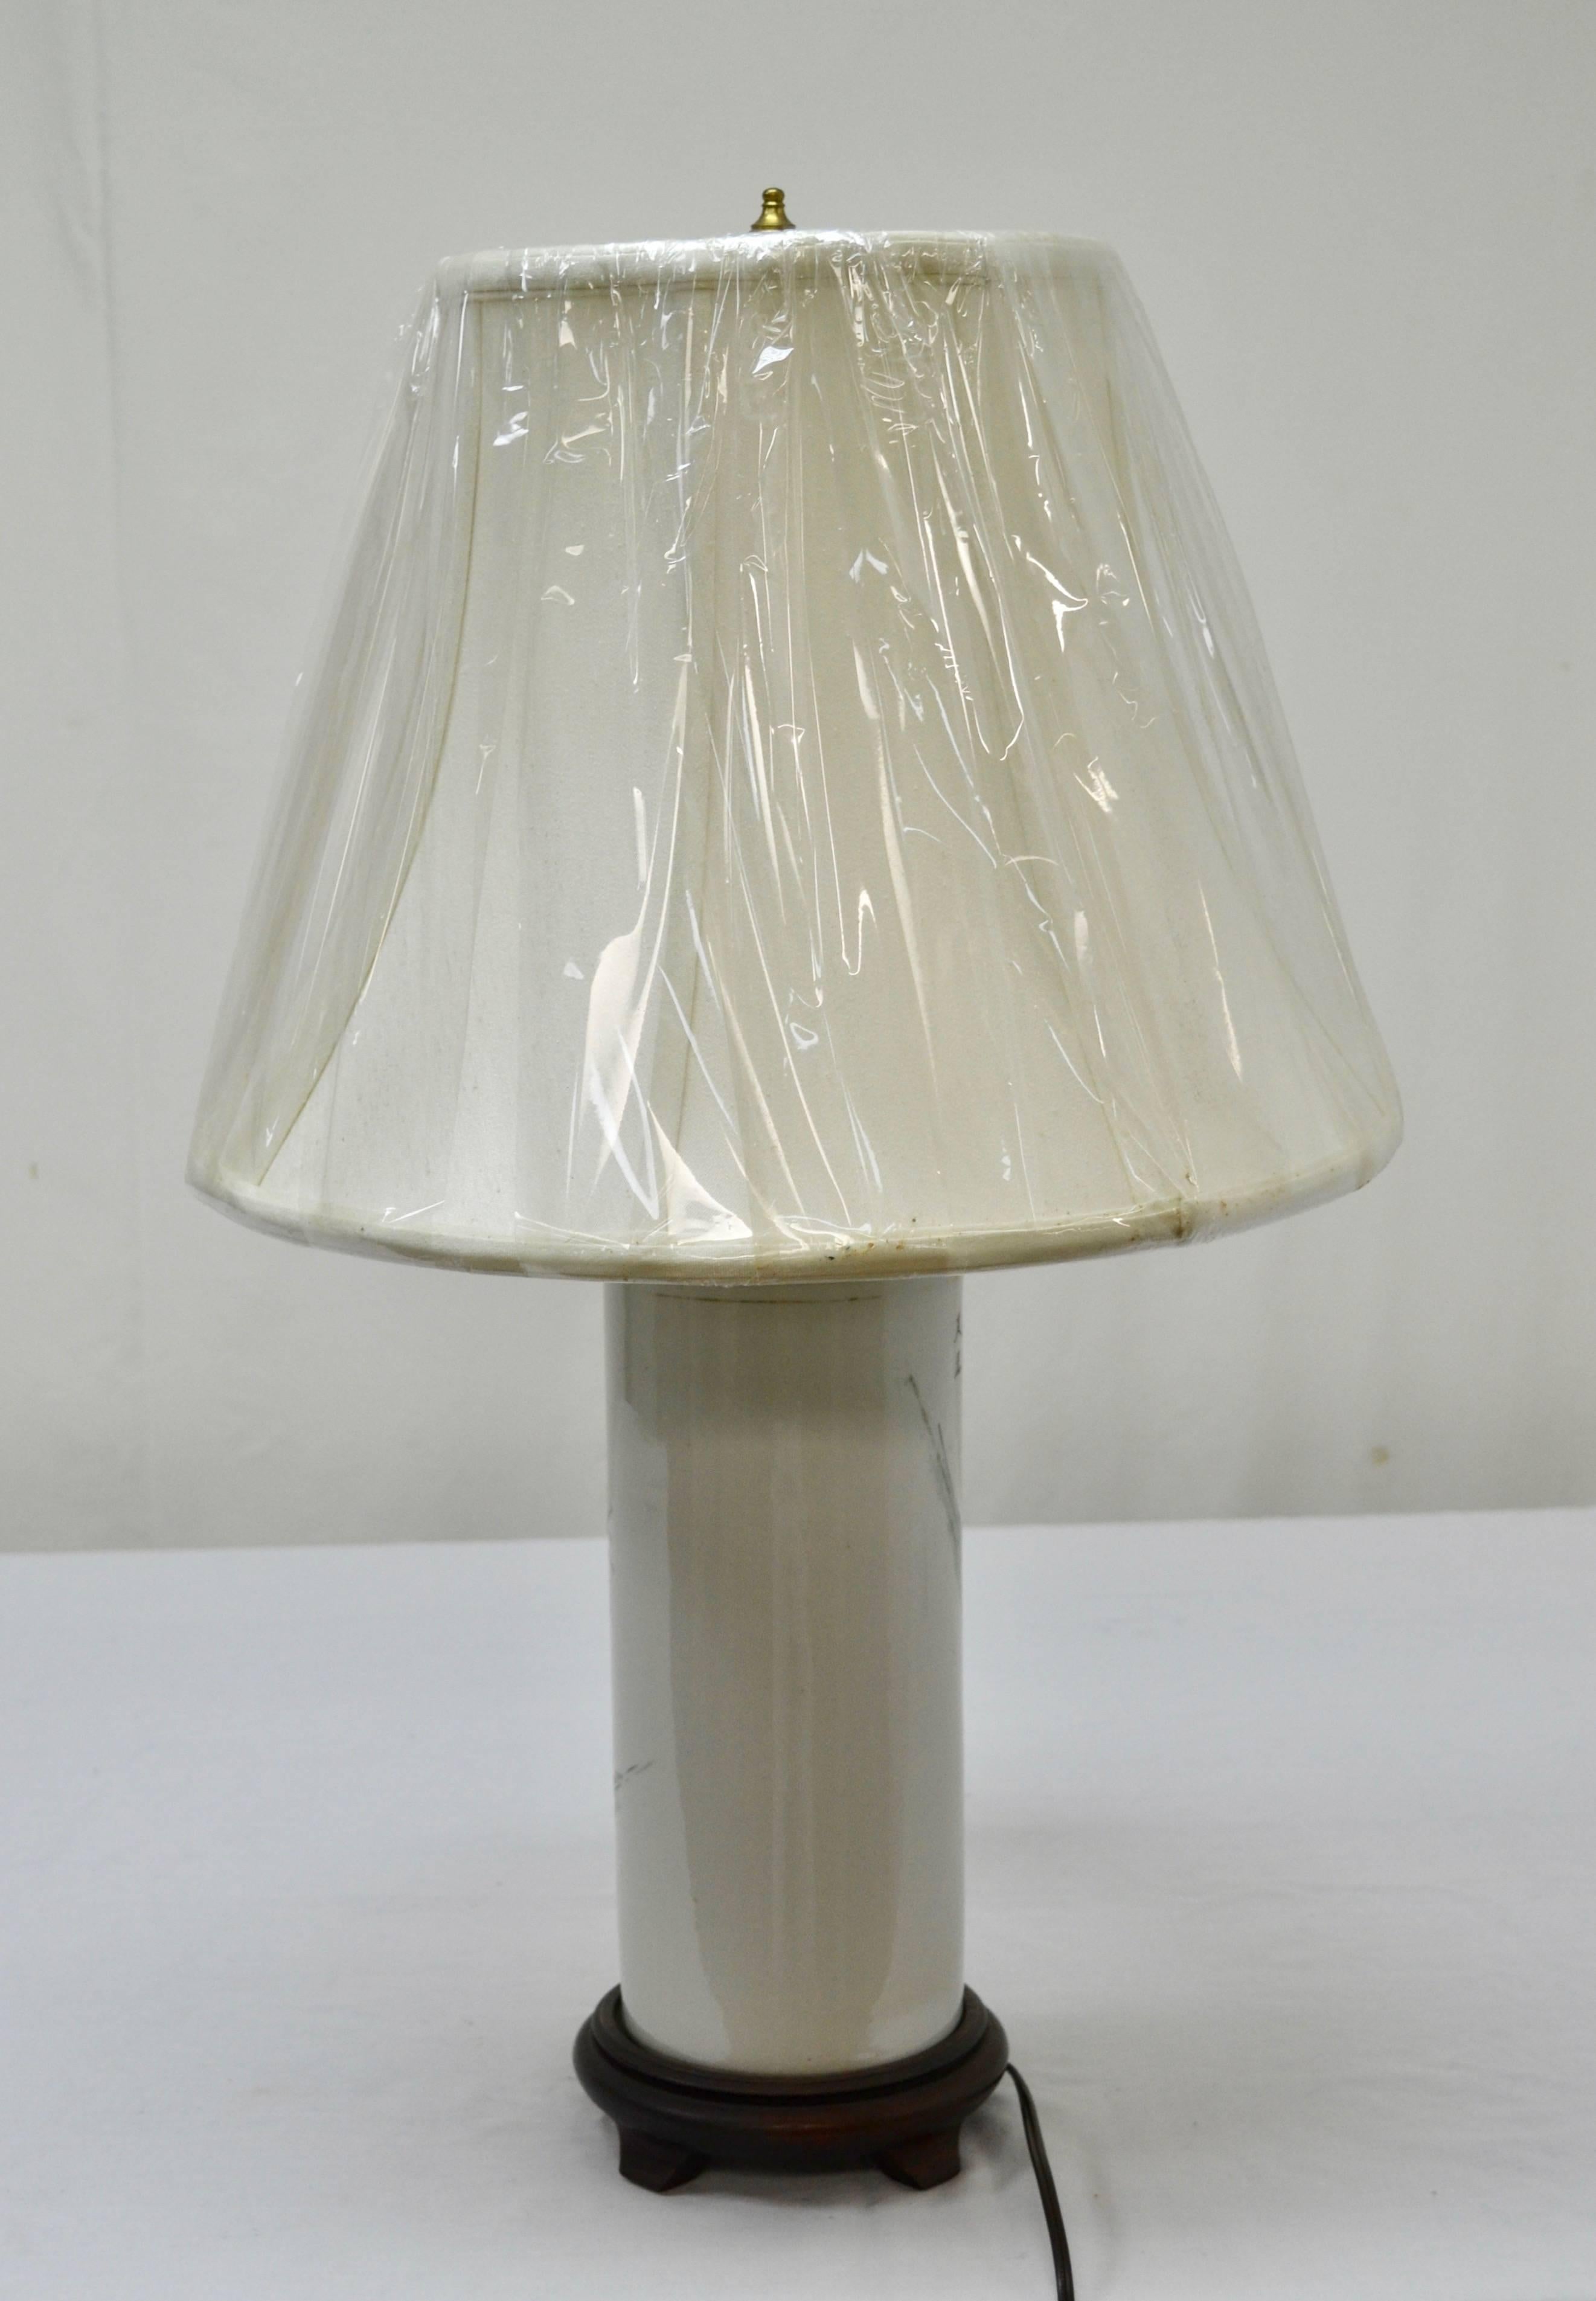 Chinese Export Chinese Porcelain Hat Stand Table Lamp